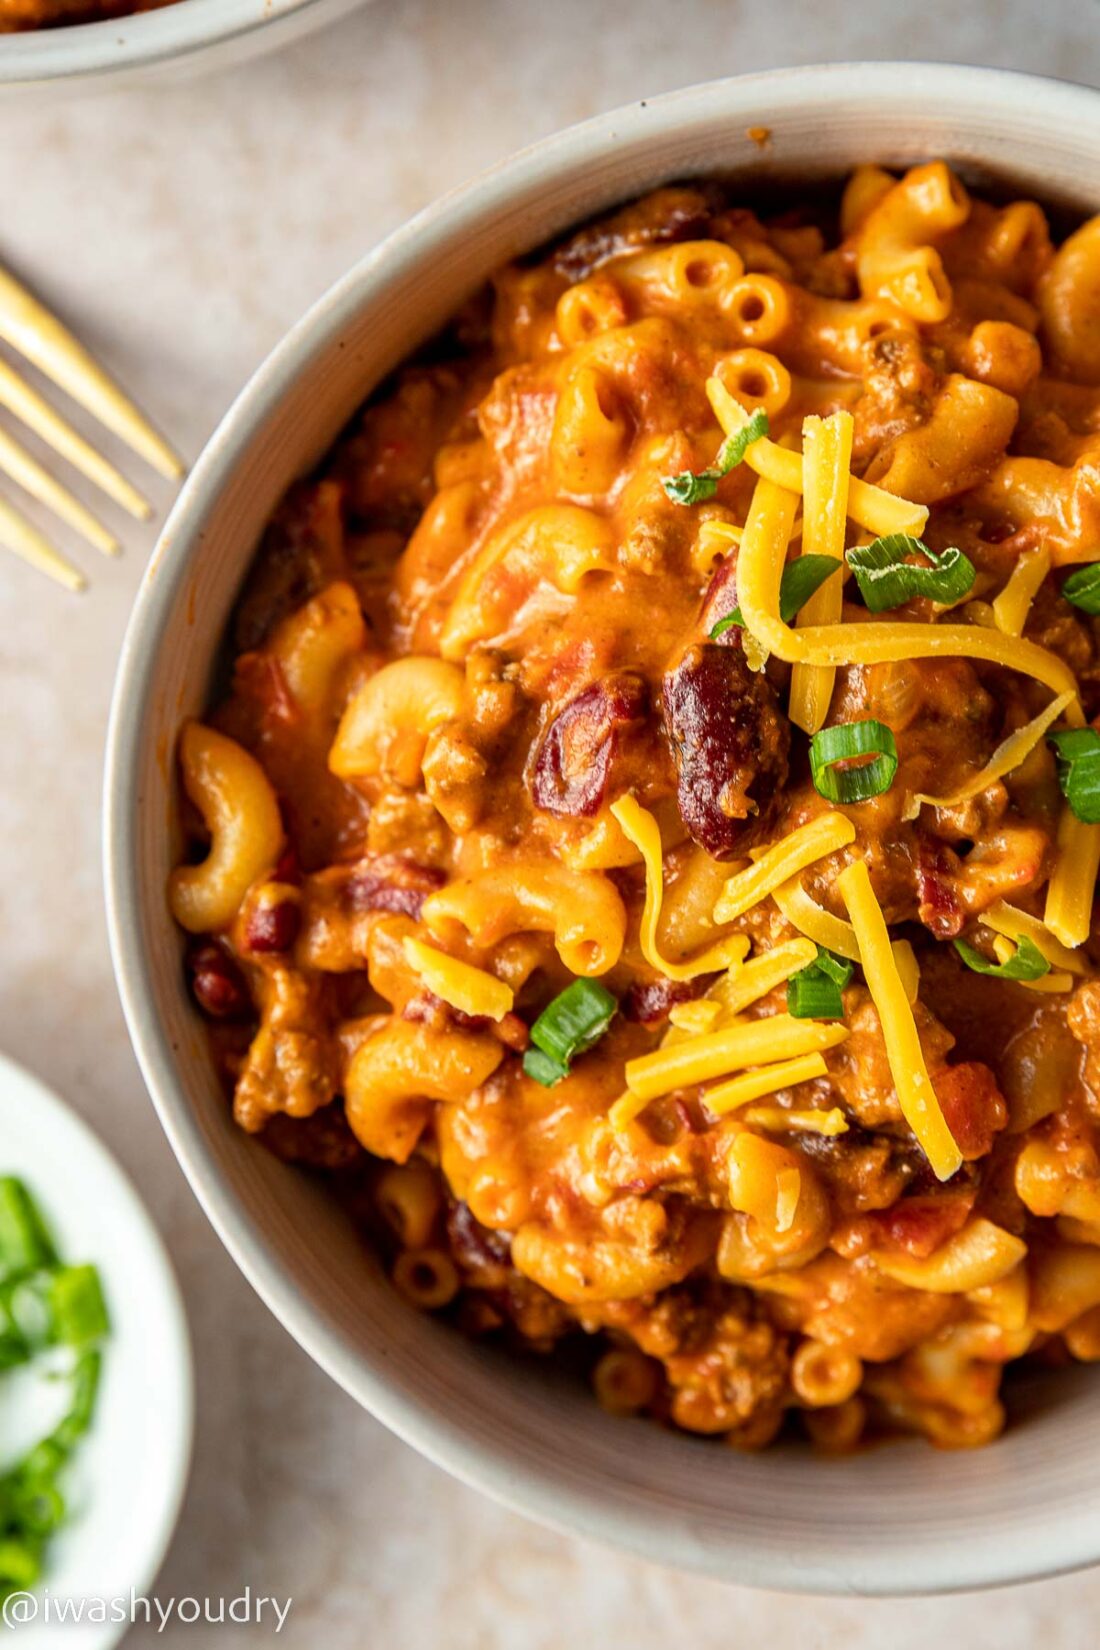 Bowl of macaroni noodles and ground beef with beans in sauce.